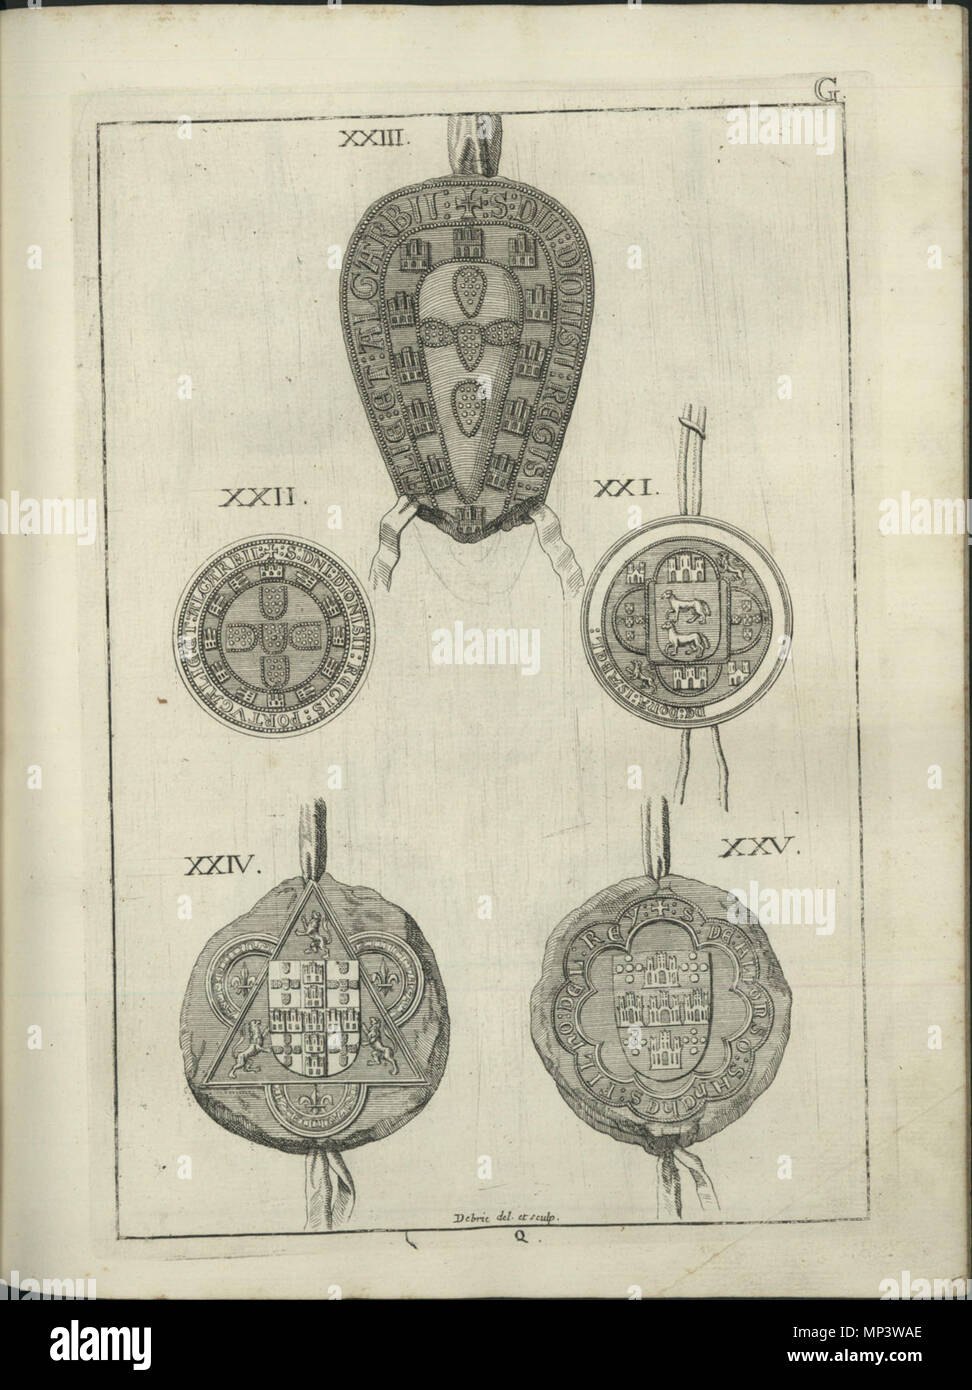 . English: Seals Portugal, illustration from Antonio Caetano de Sousa, História genealogica da Casa Real Portugueza, t. IV, Lisbon, 1738 XXI - Isabel de Portugal y Manuel, lady of Visacaya, Letter to the monastery S. Vincente de Fora, 1324 XXII - Lesser seal of king Dinis of Portugal, contract with the monastery S. João de Tarouça, 1st of May 1306 XXIII - greater seal of king Dinis, donation to the city of Arronches, 14 january 1288 XXIV, XXV - Seals of Don Afonso Sanches, son of this king, 18 october 1318.  . 1738. Antonio Caetano de Sousa (1674-1759) 1107 Seals of the royal house of Portugal Stock Photo